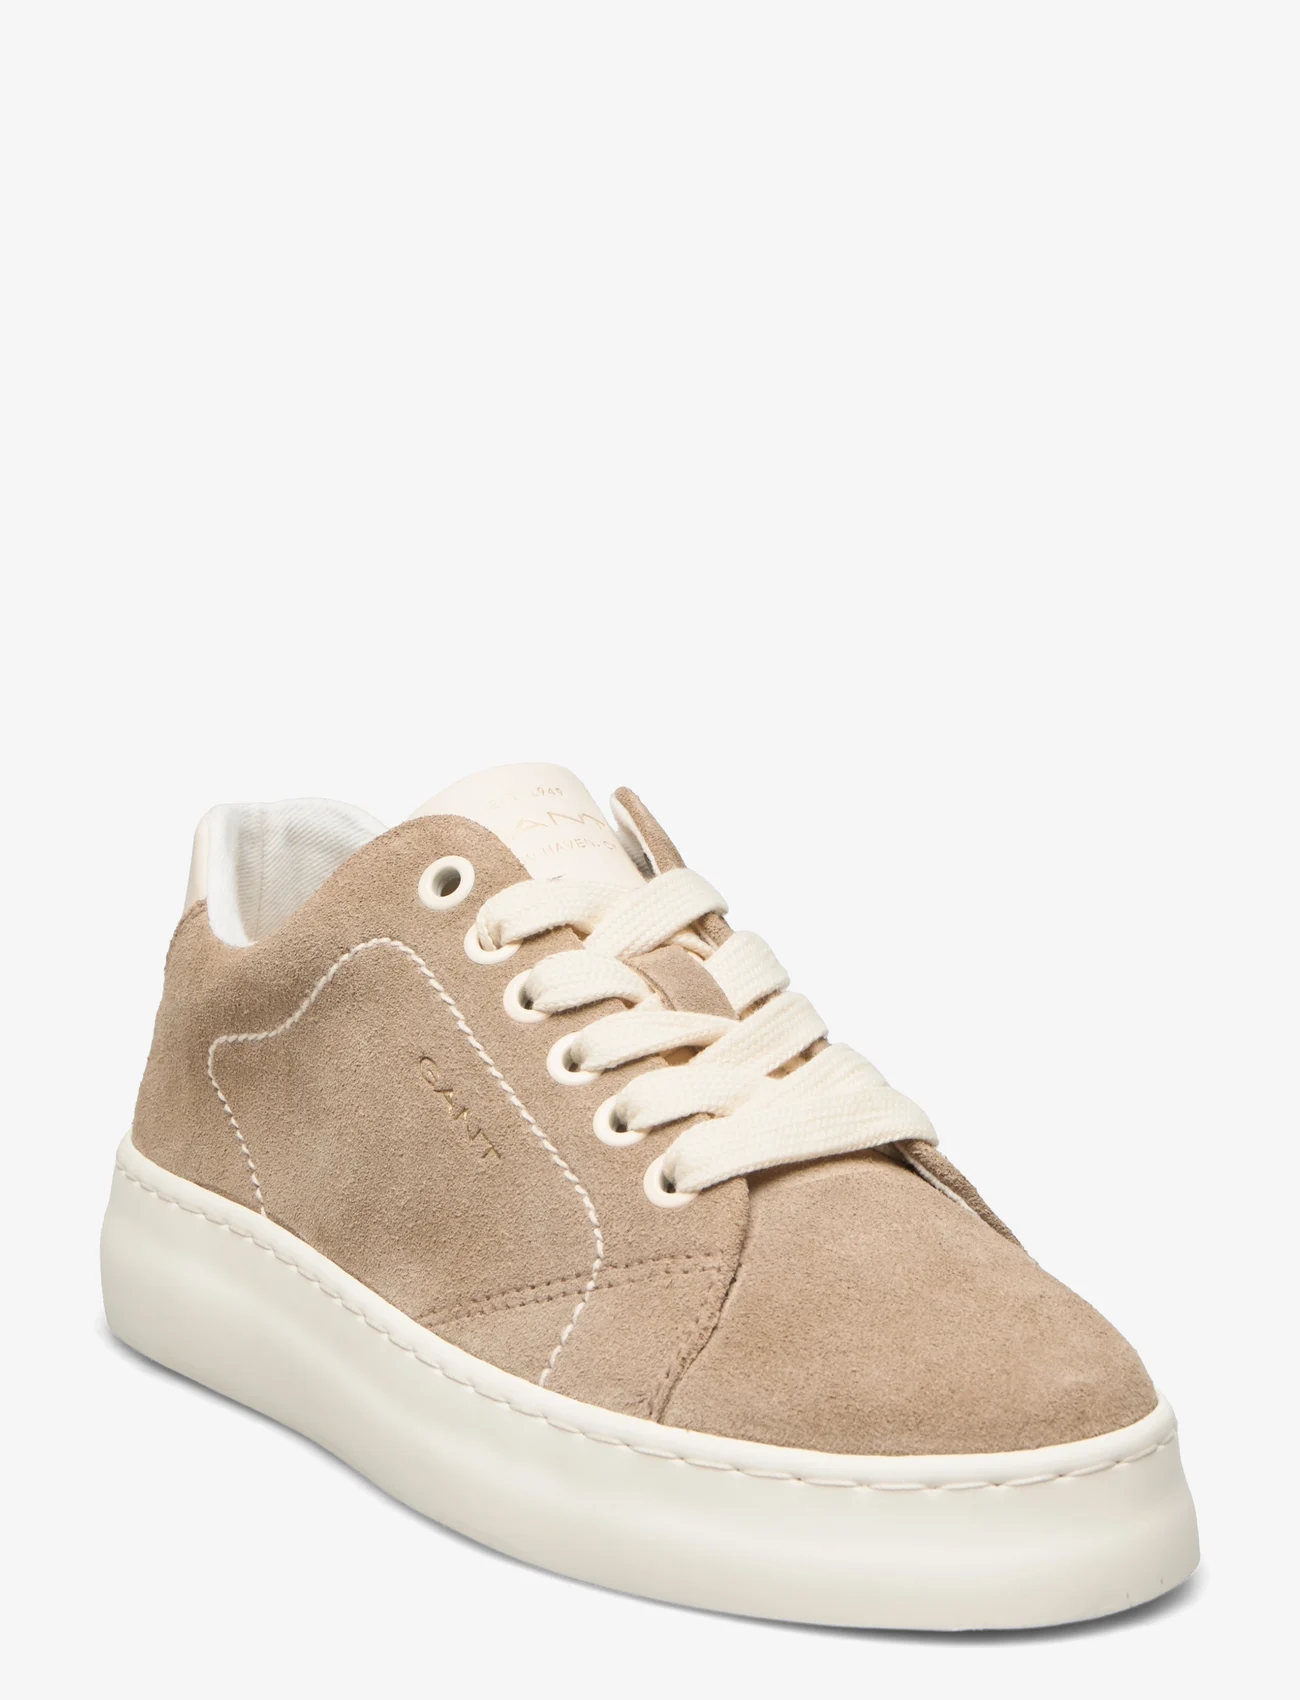 GANT - Lawill Sneaker - taupe - 0